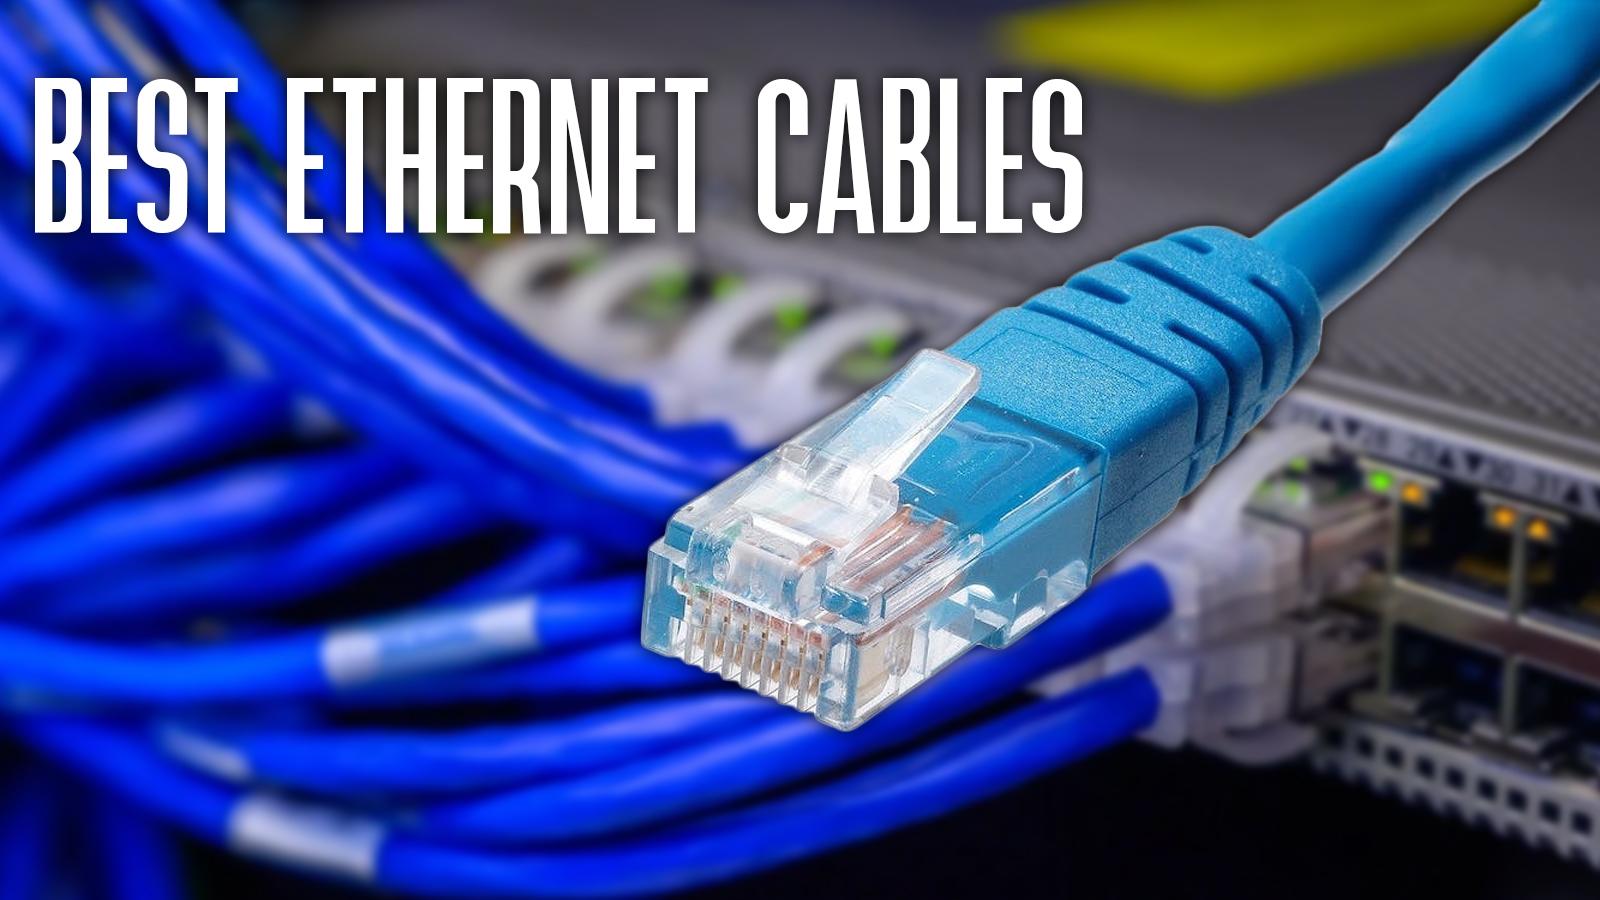 Cat 5 vs Cat 6 ethernet cables: What You Need to Know